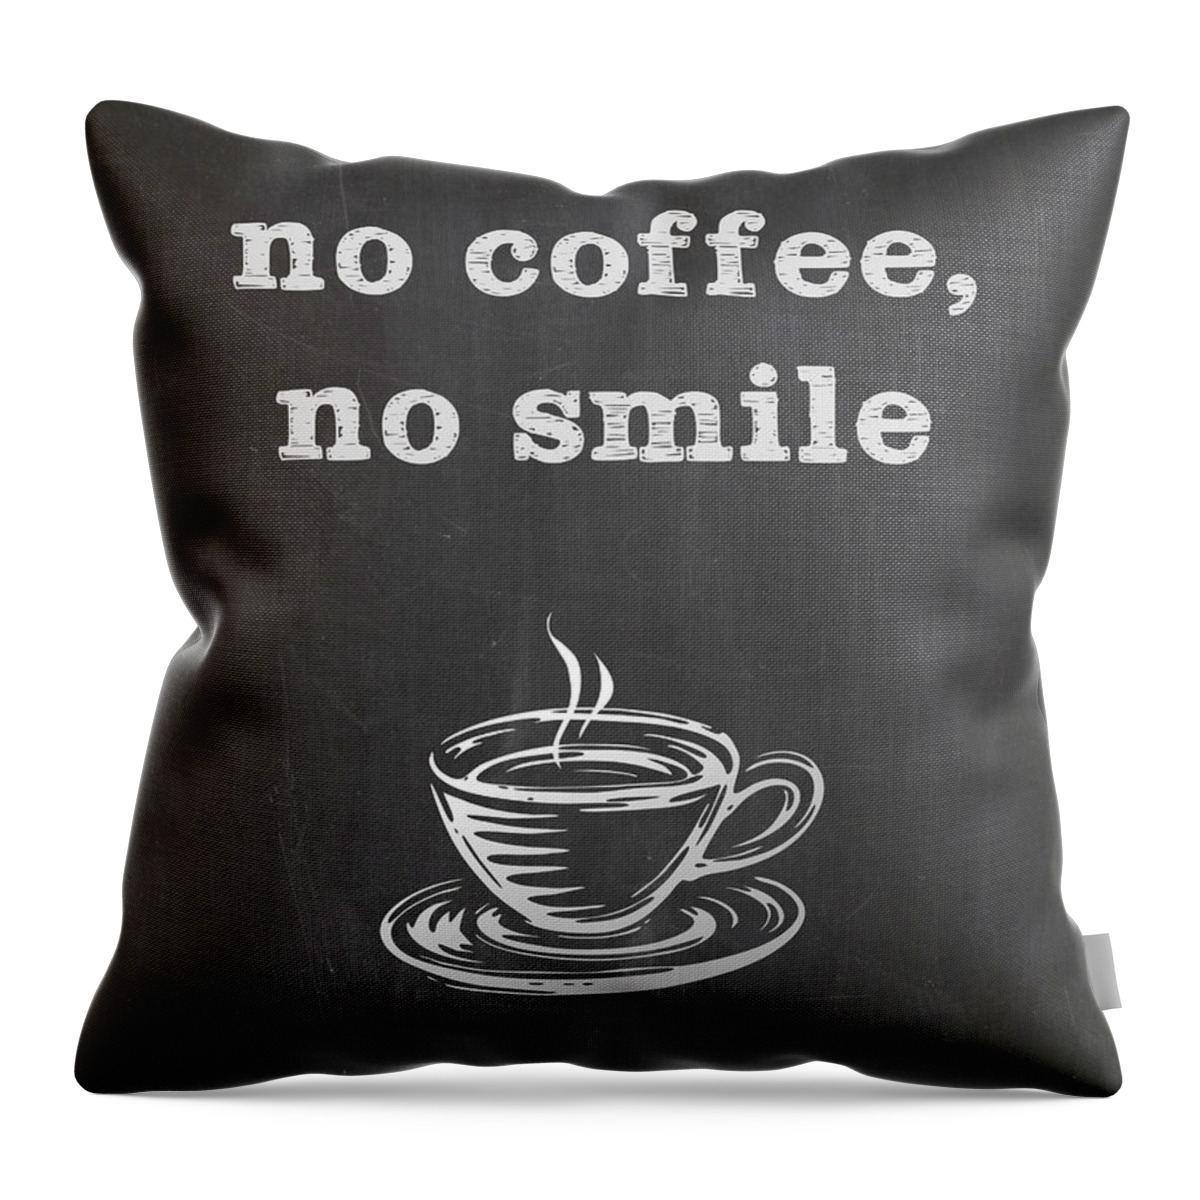 Coffee Throw Pillow featuring the digital art No Coffee No Smile by Nancy Ingersoll